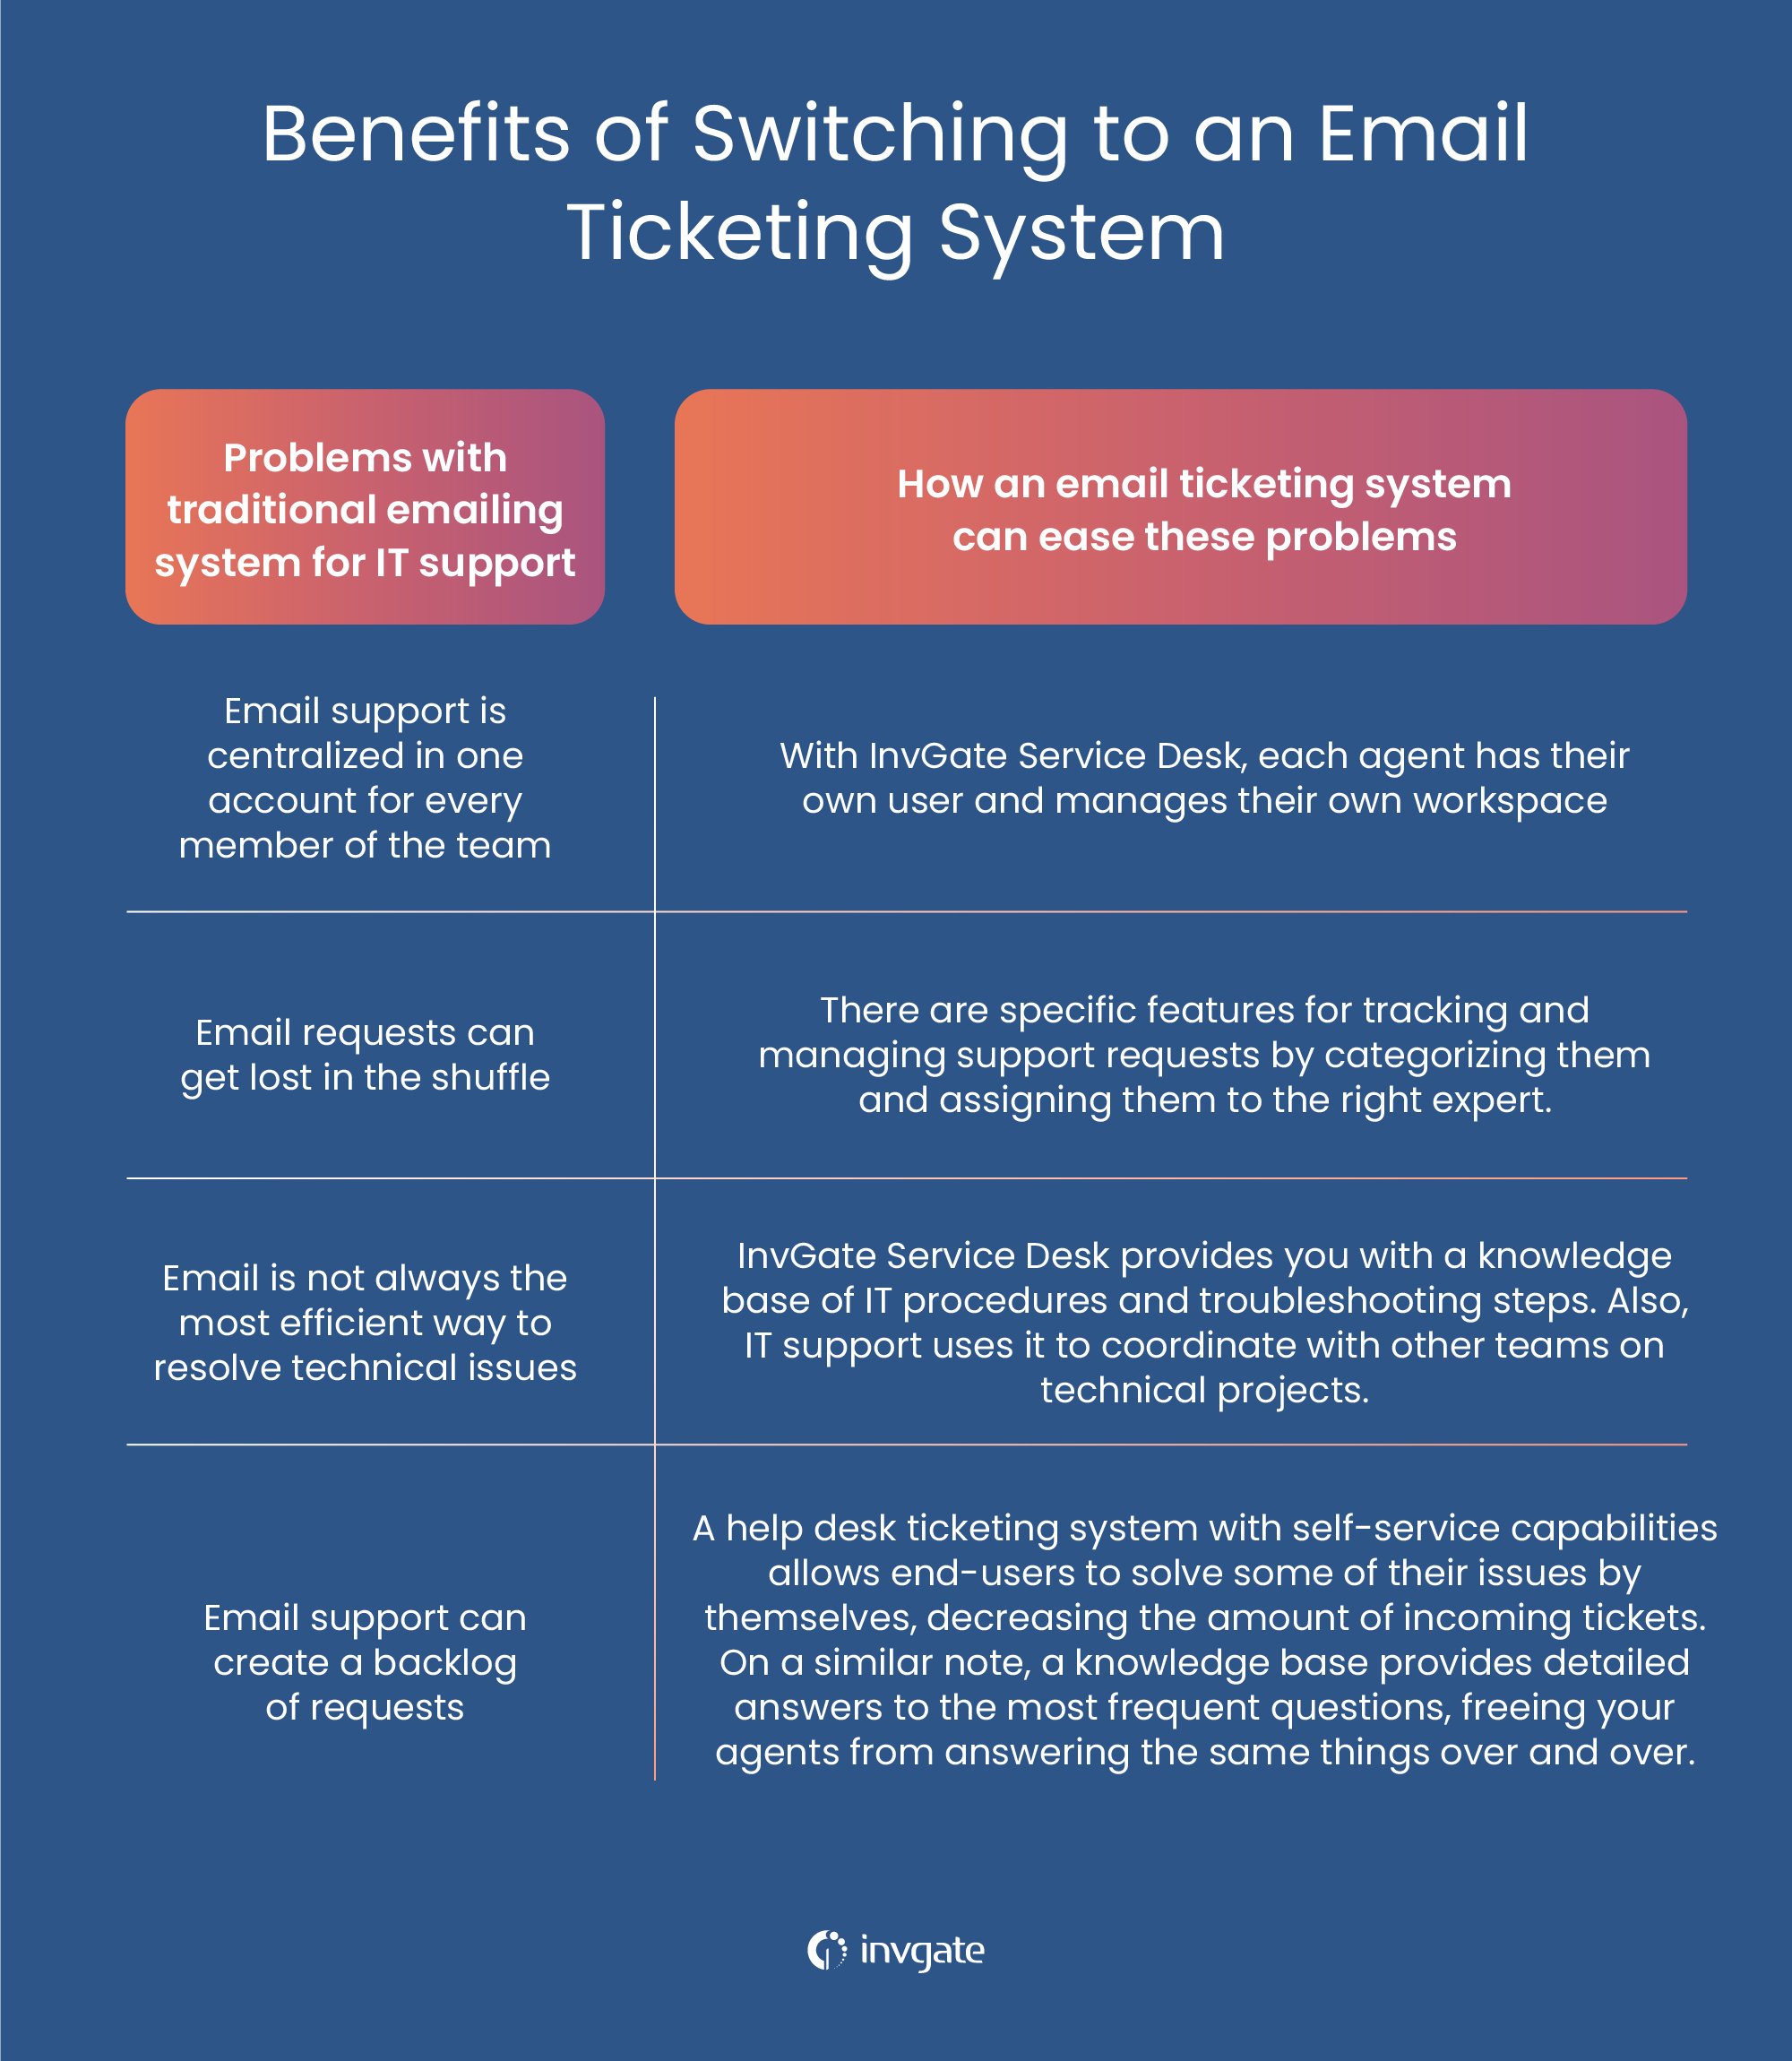 Email support requests can quickly become overwhelming, especially for busy IT departments. Here's how an email ticketing system improves each of the most common problems of using email for IT support.